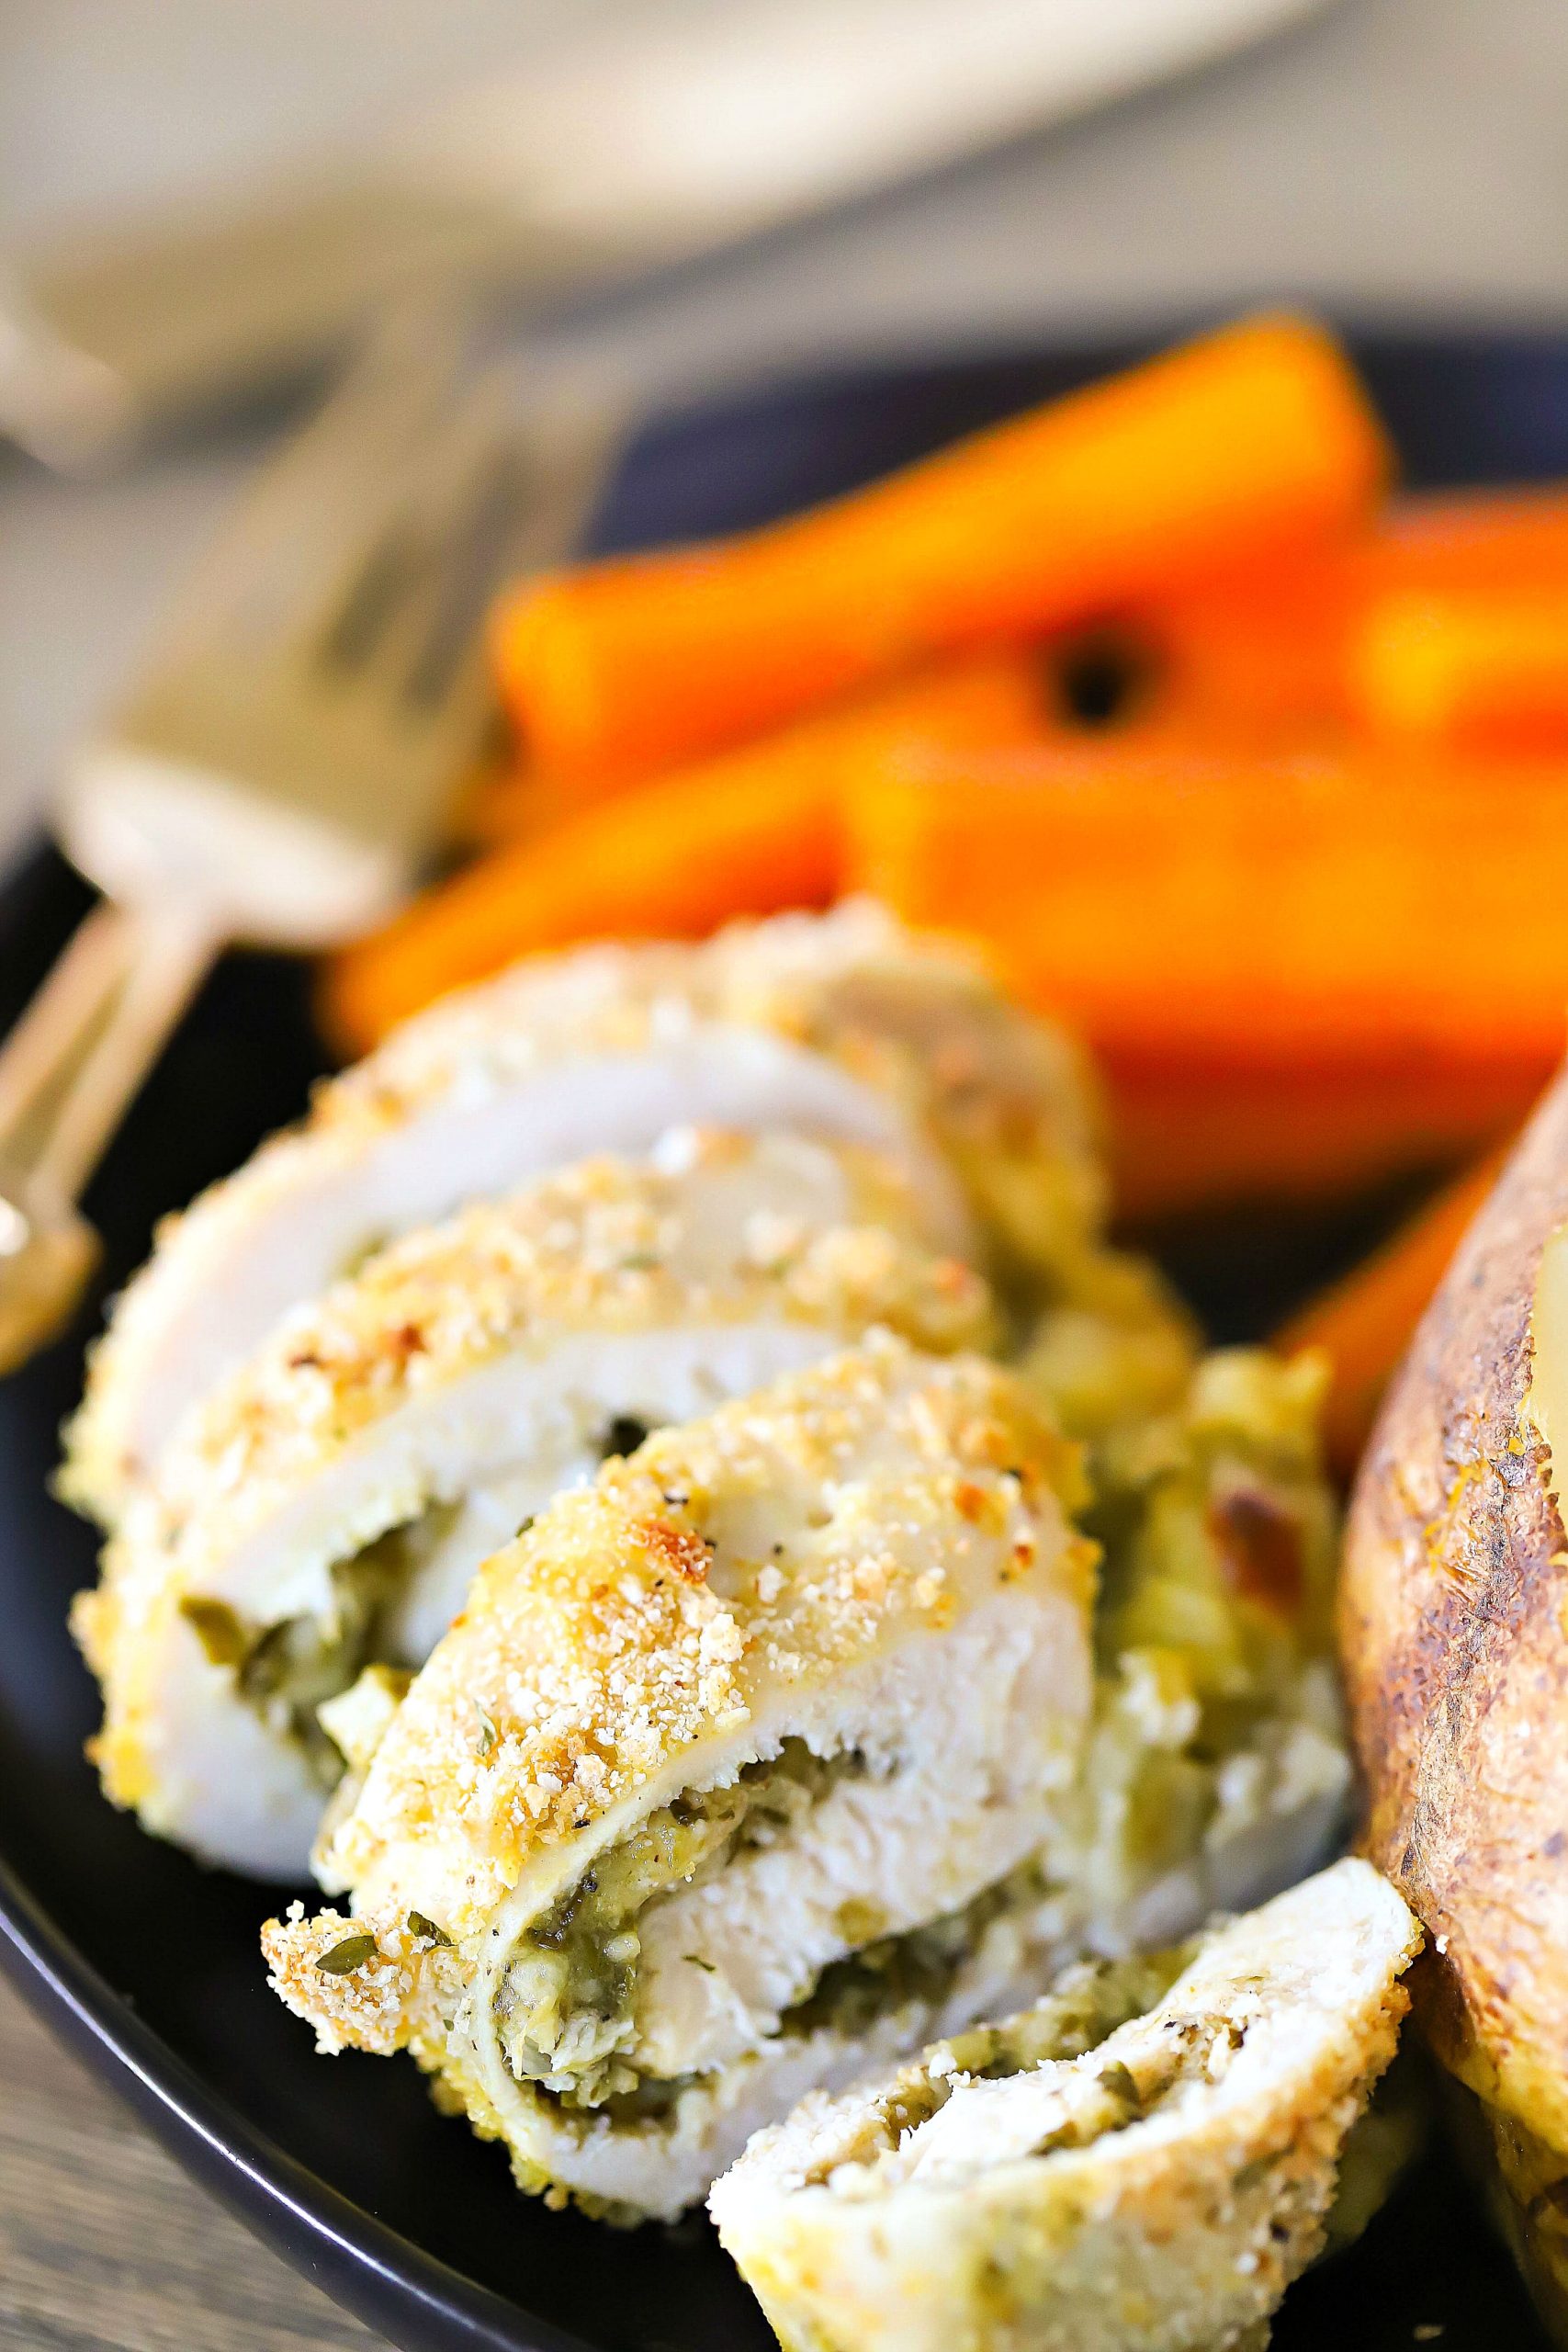 Sliced Pesto Stuffed Chicken on a black plate with a side of carrots and baked potato